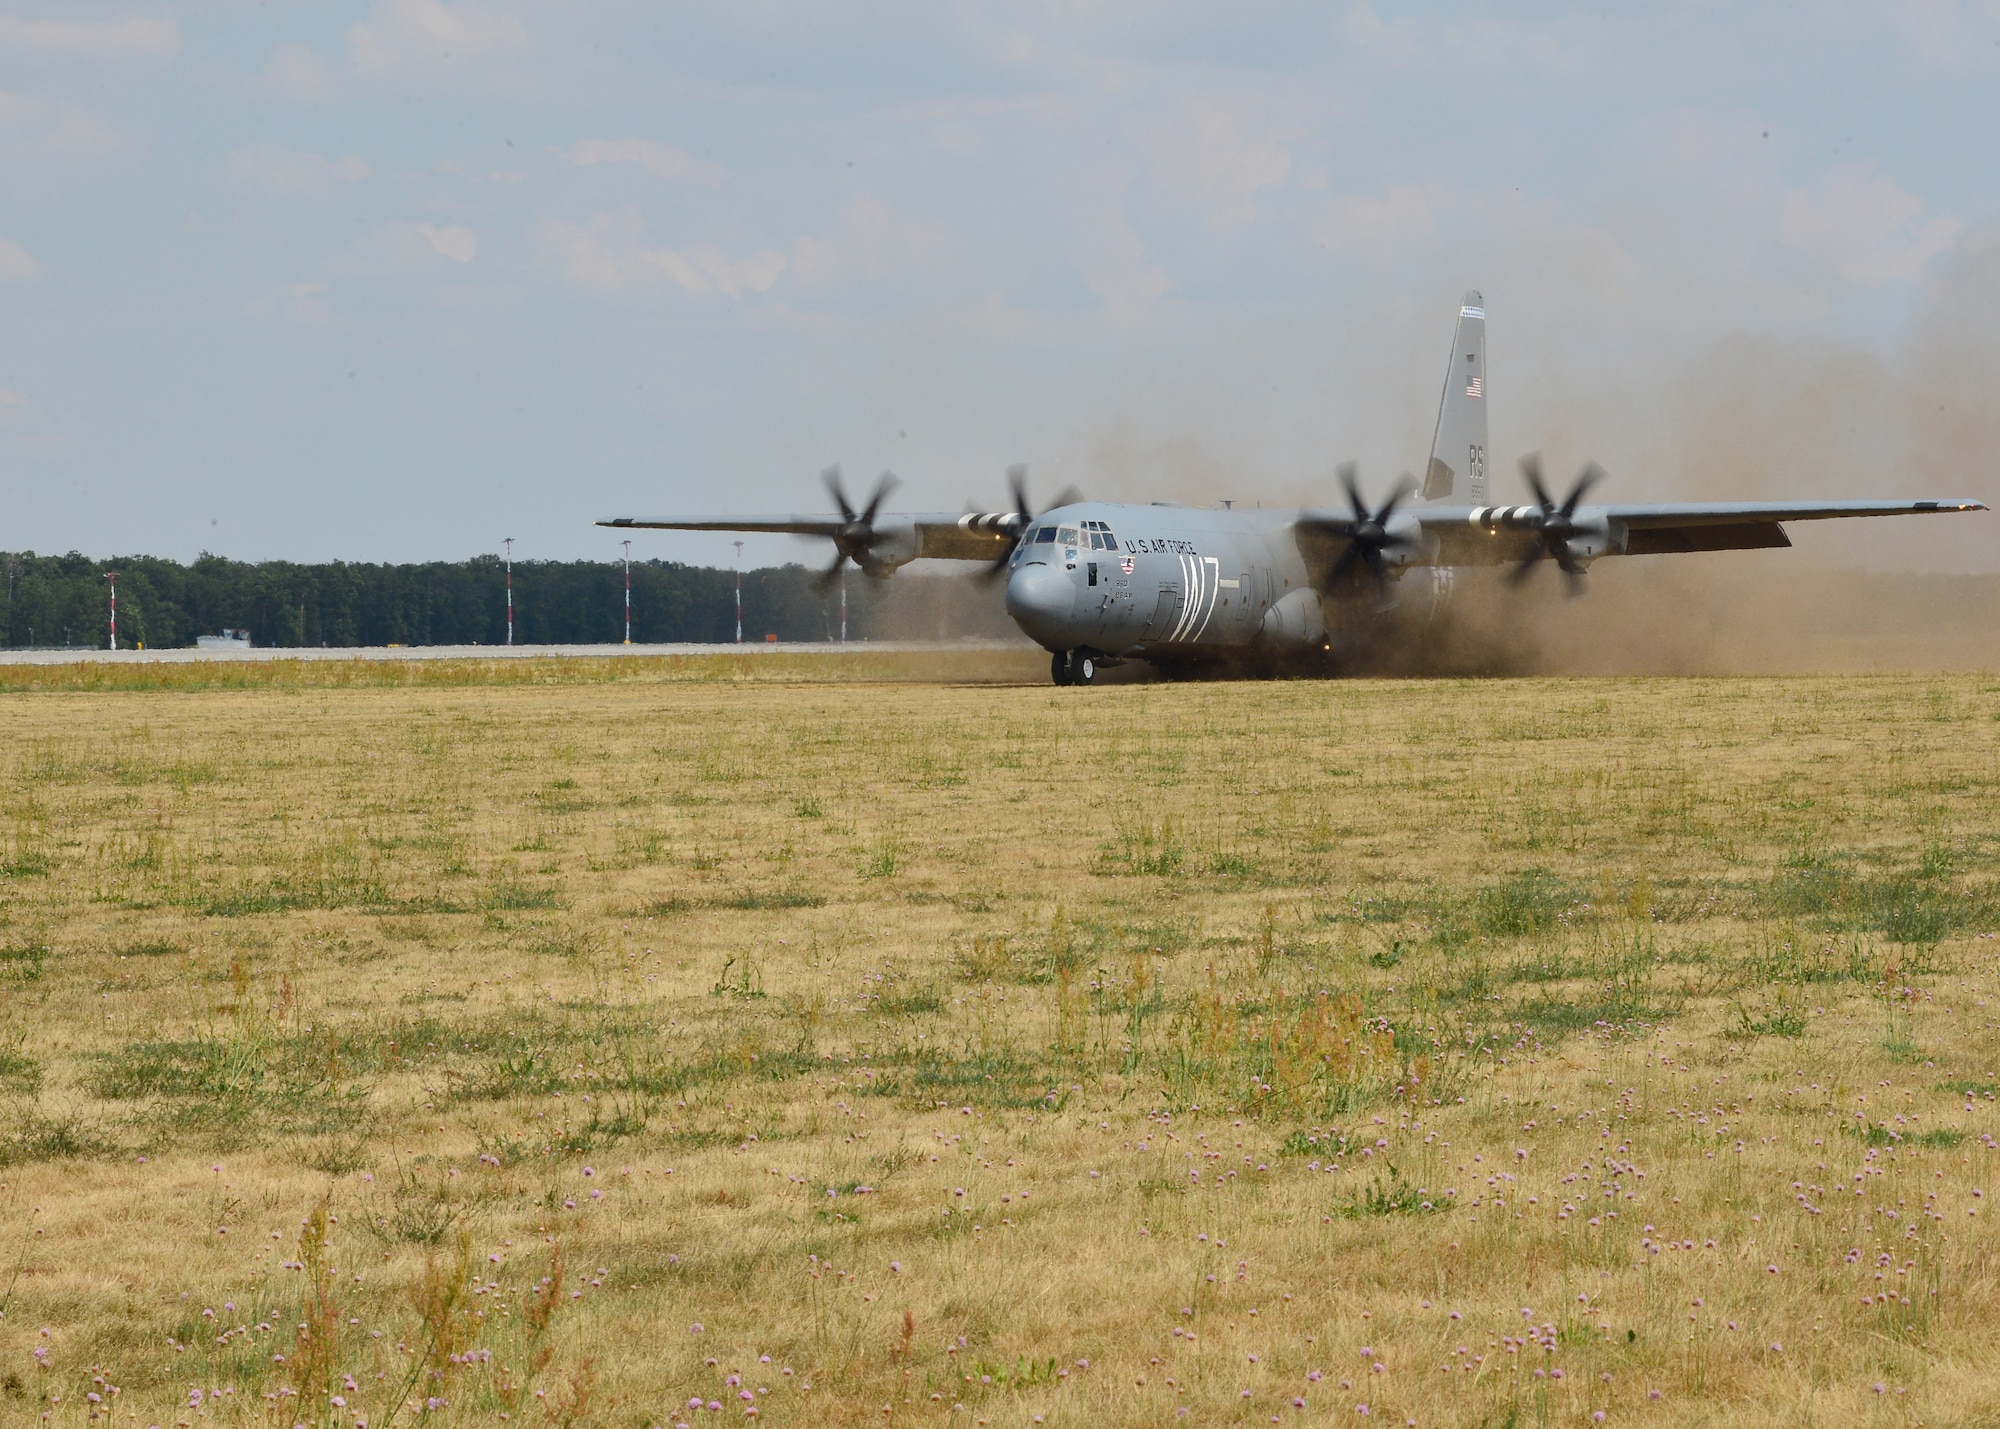 A U.S. Air Force C-130J Super Hercules assigned to the 37th Airlift Squadron lands on a grass landing zone at Powidz Air Base, Poland, July 20, 2019. Pilots were able to practice landing on unpaved surfaces to improve their capabilities and readiness. (U.S. Air Force photo by Staff Sgt. Jimmie D. Pike)